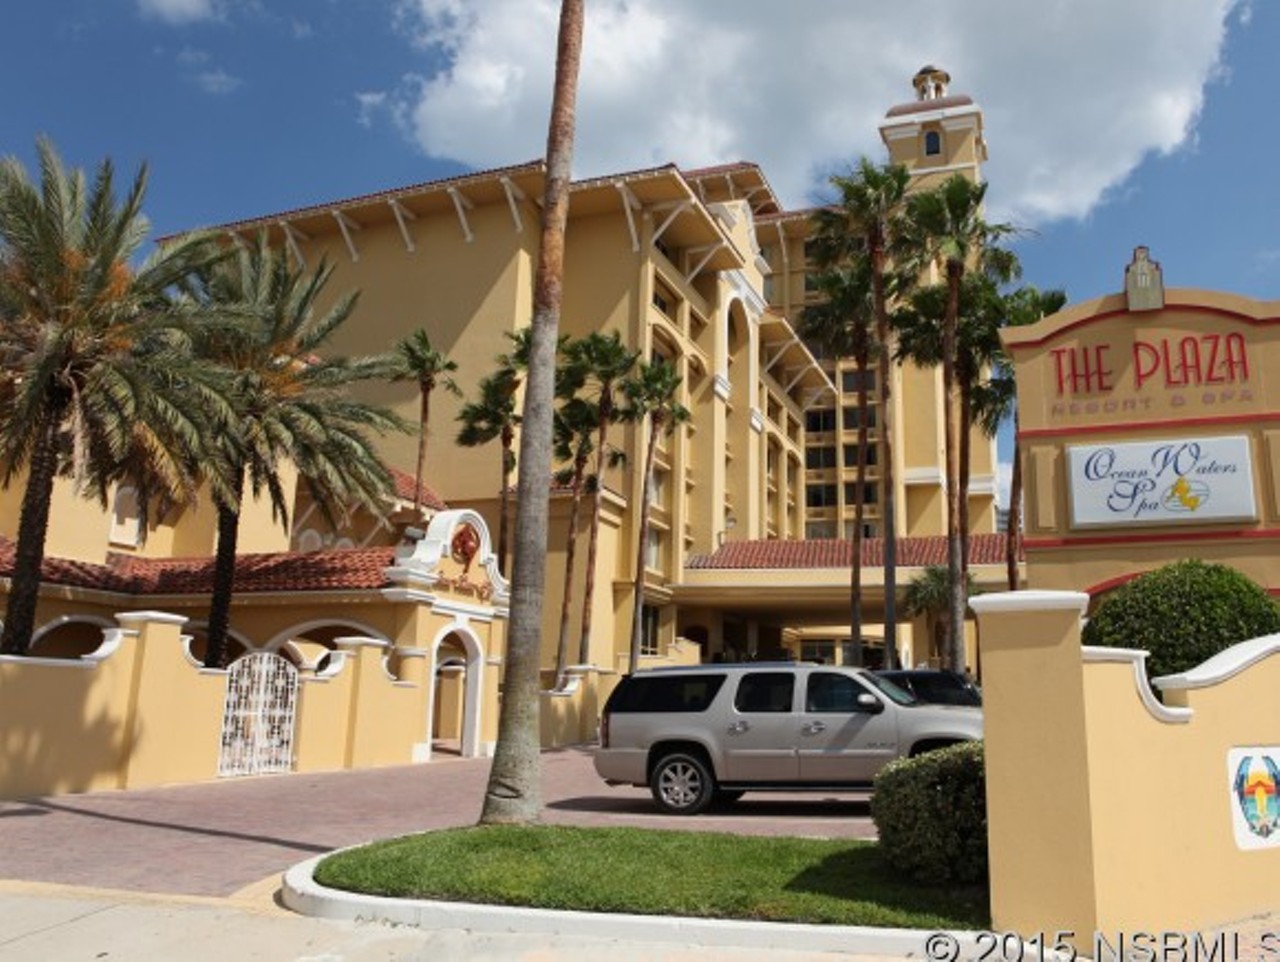 600 N. Atlantic Ave., Unit 1402, Daytona Beach
For just $76,900, here's another "condotel" for sale.